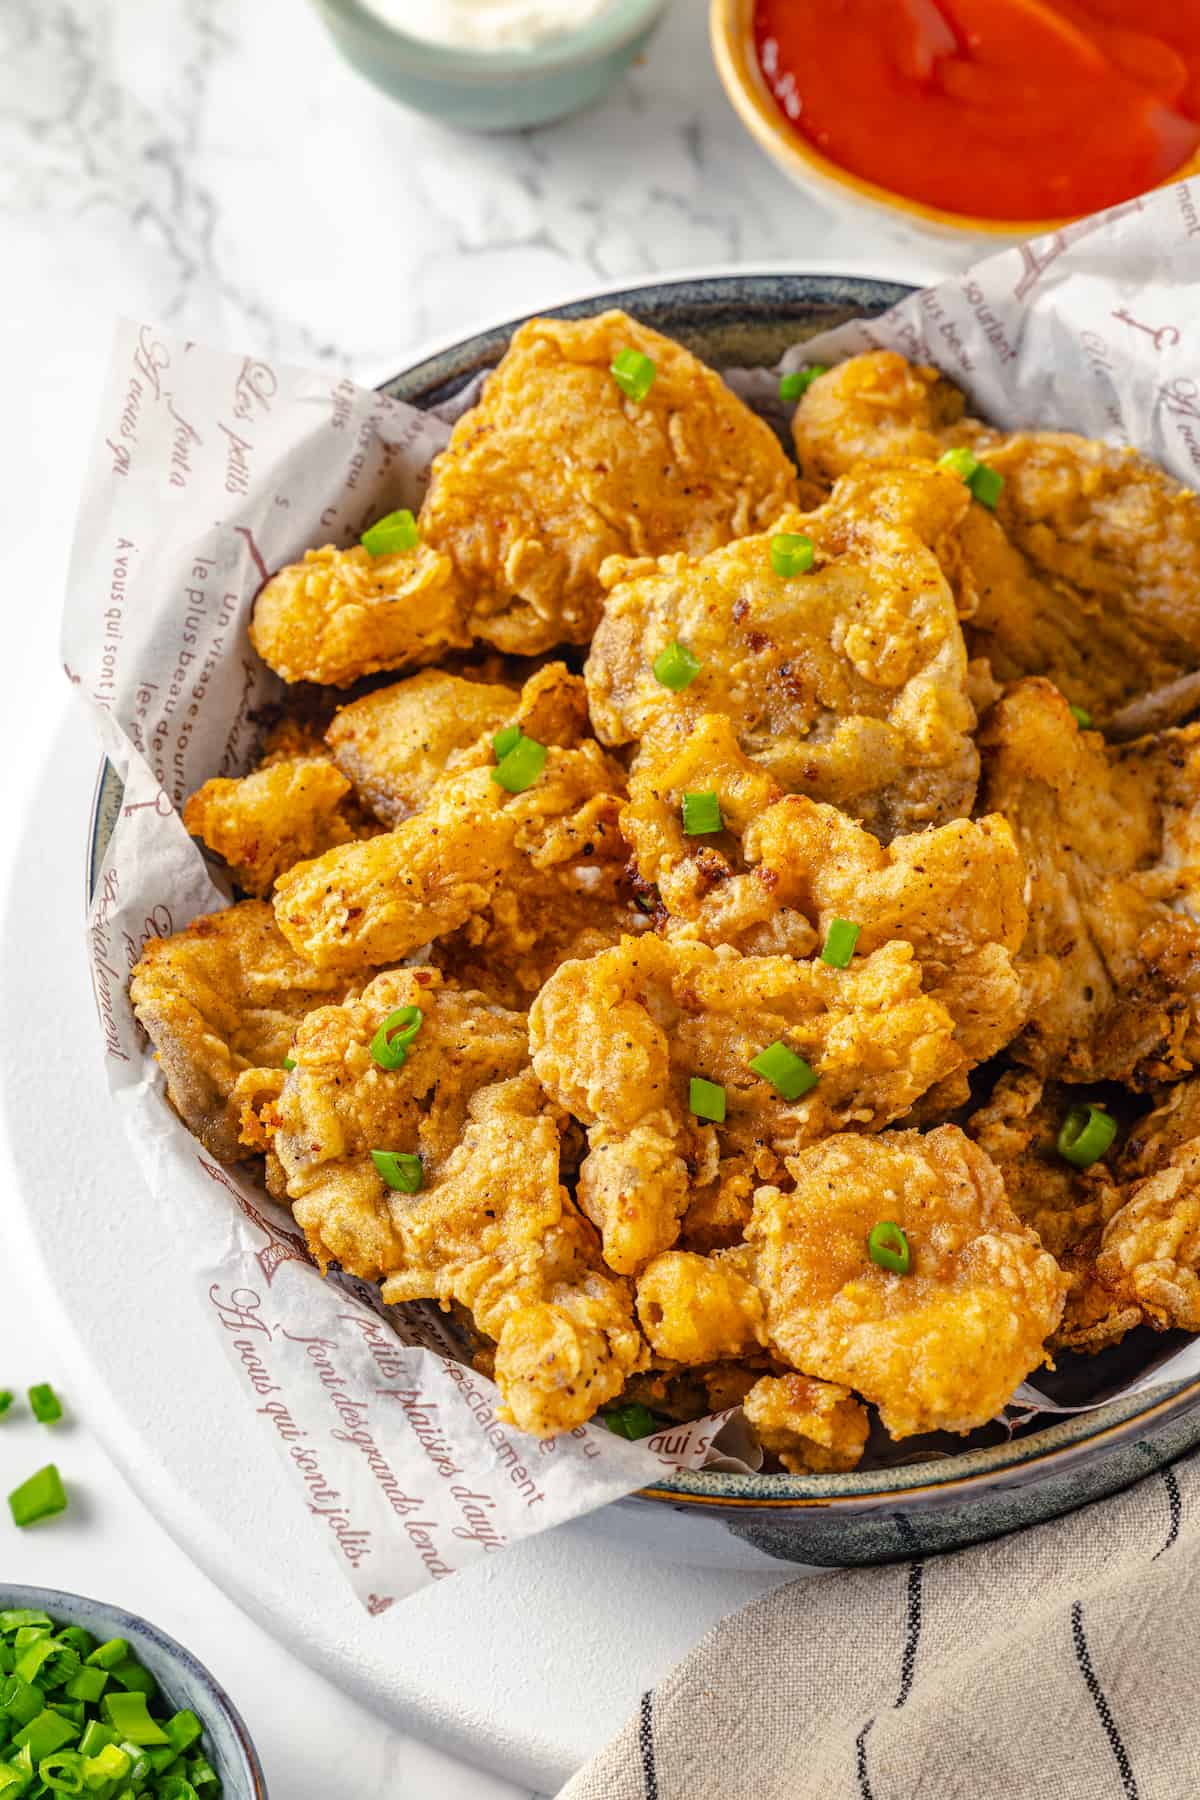 Bowl of vegan fried chicken garnished with sliced green onions